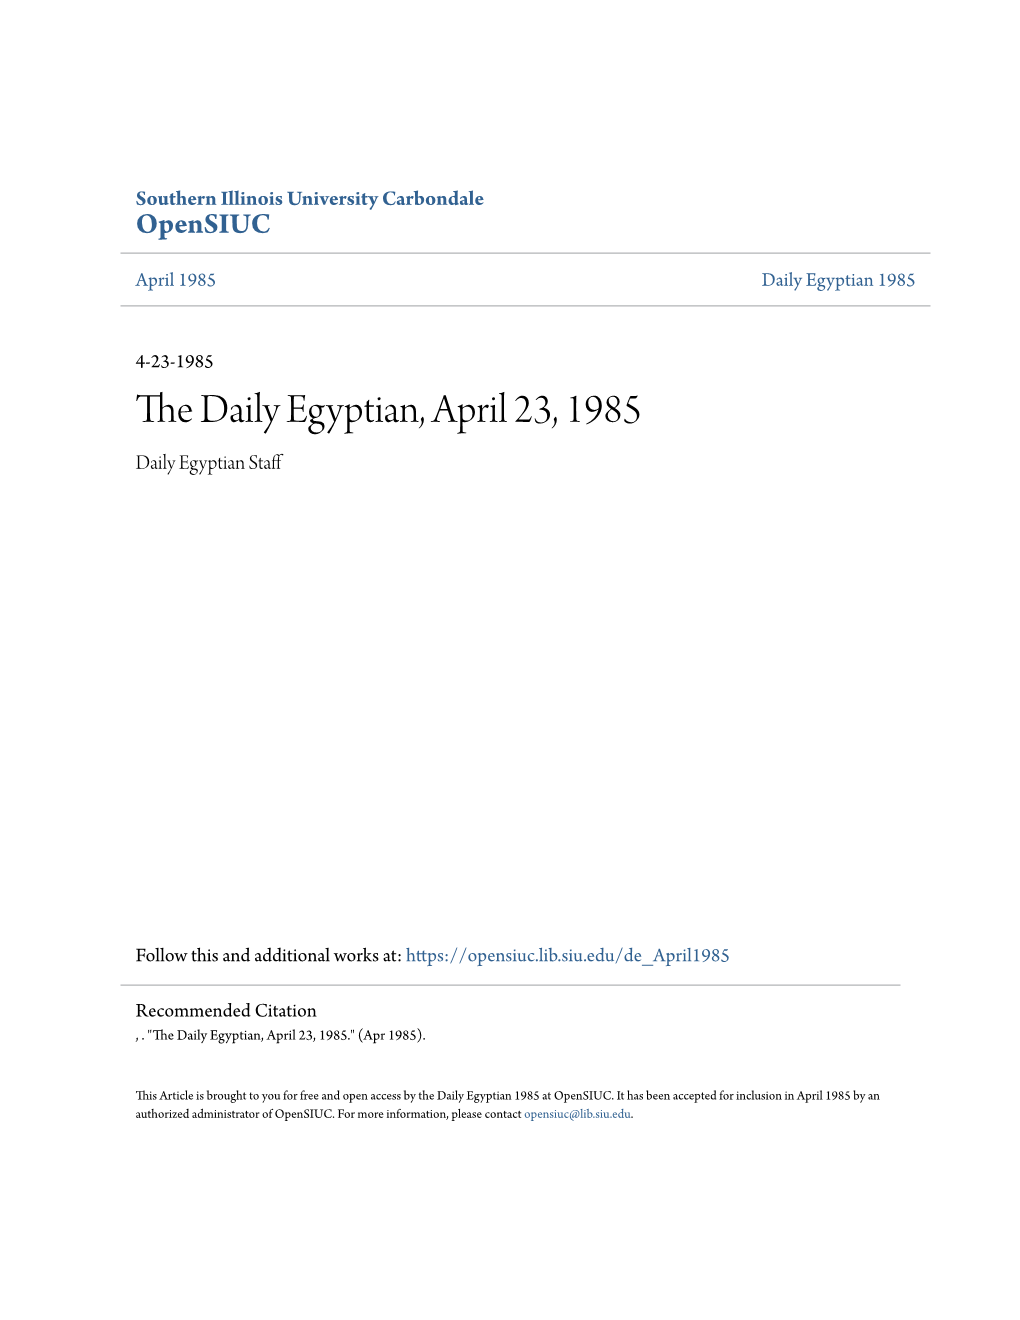 The Daily Egyptian, April 23, 1985